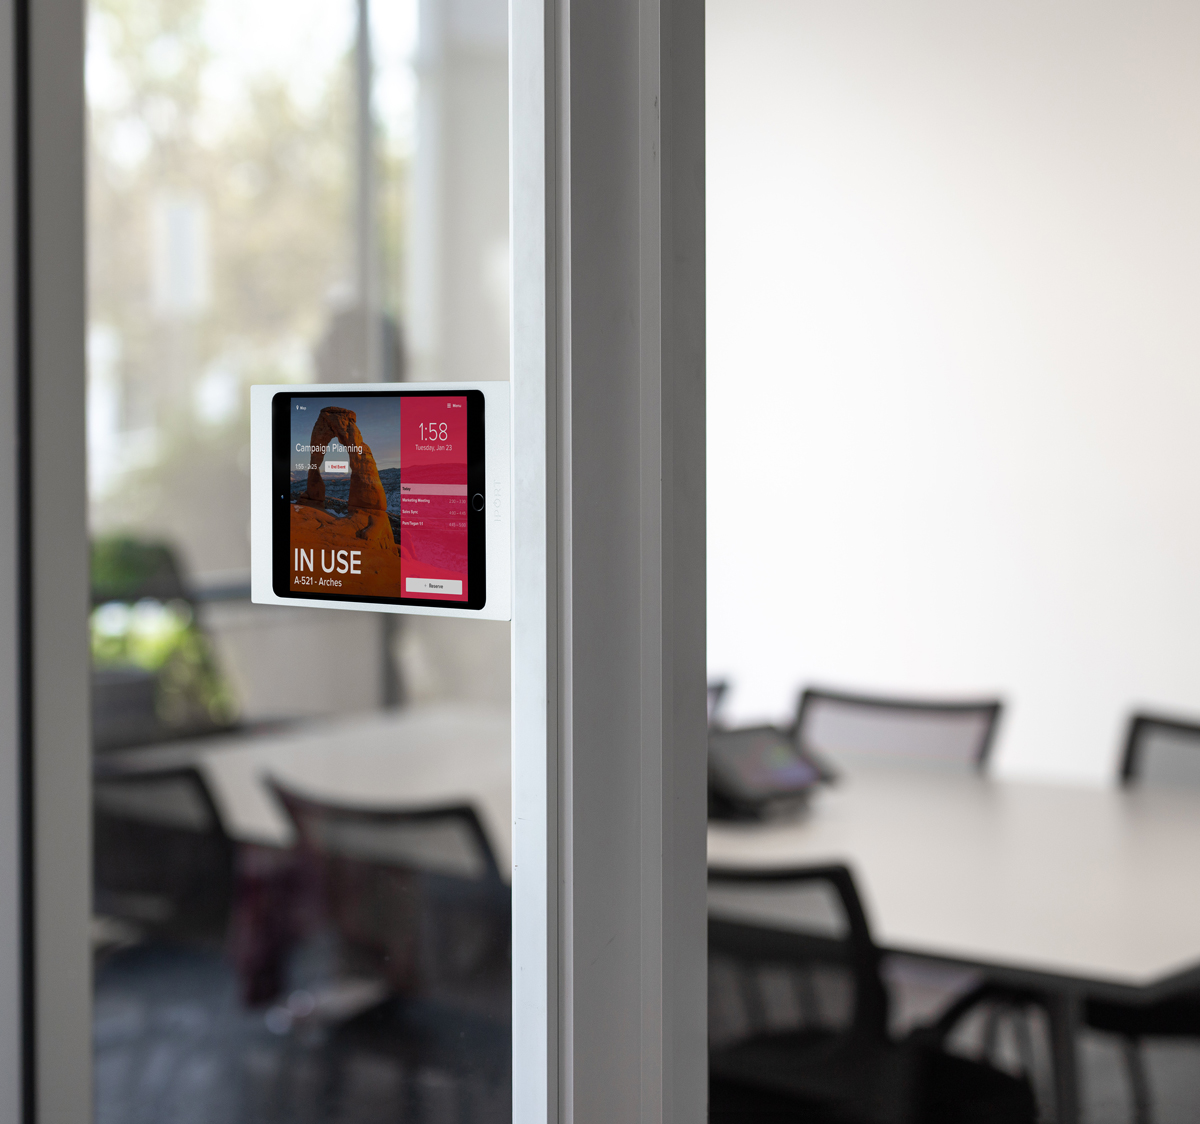 Side Mount, the iPad wall mount for business, mounted on a class door in a corporate office.